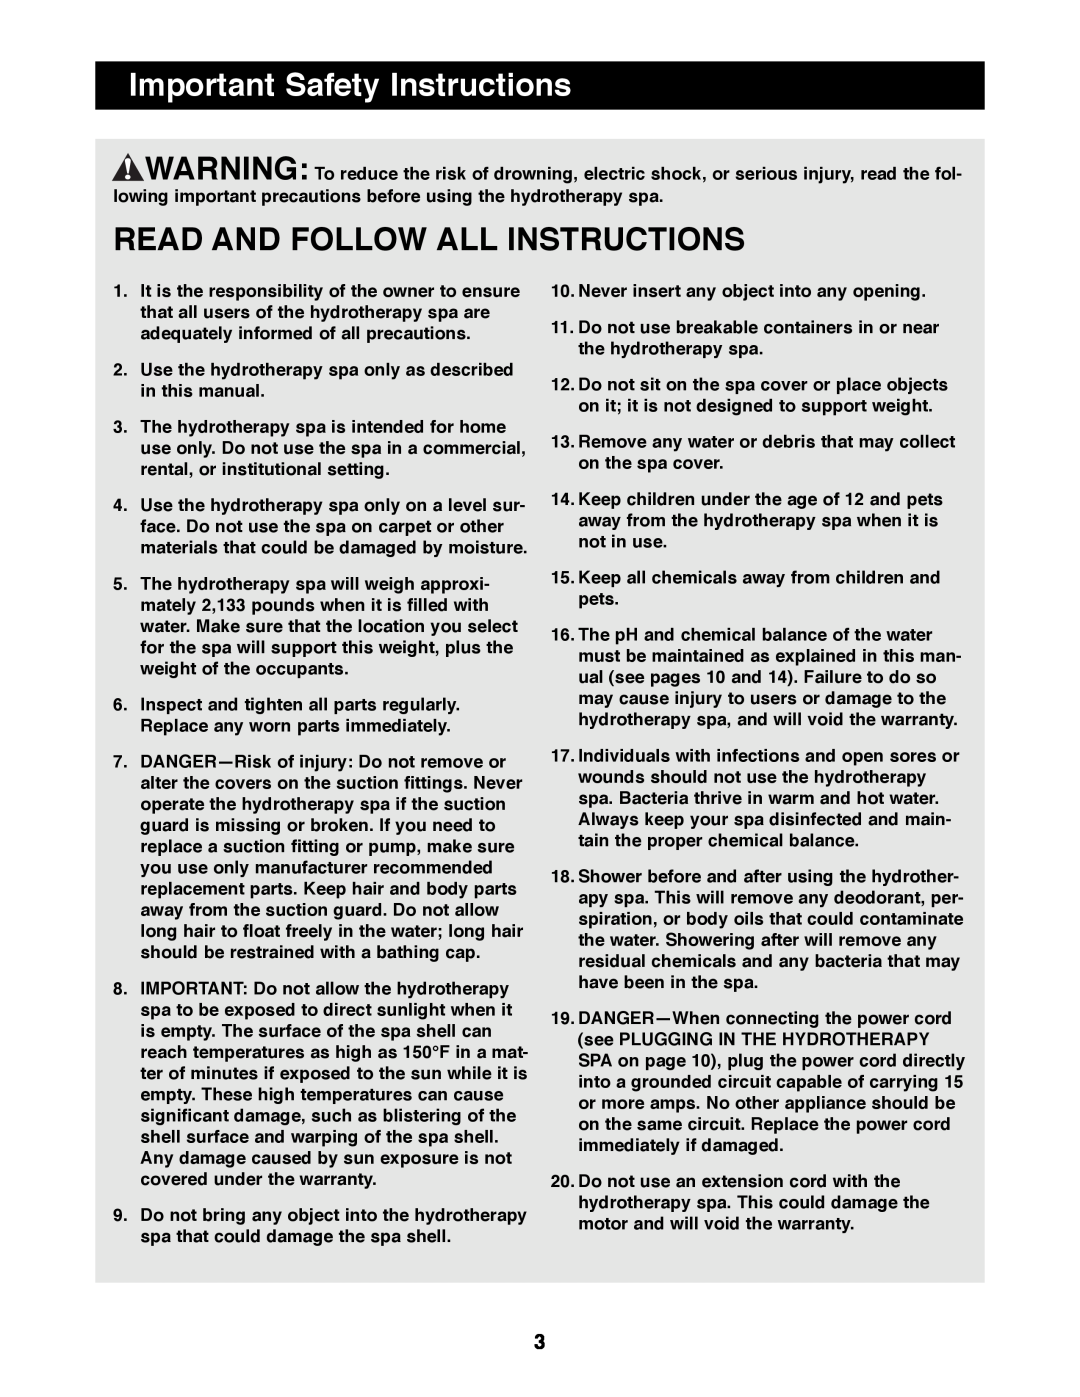 Image IMHS45590 manual Important Safety Instructions, Read And Follow All Instructions 